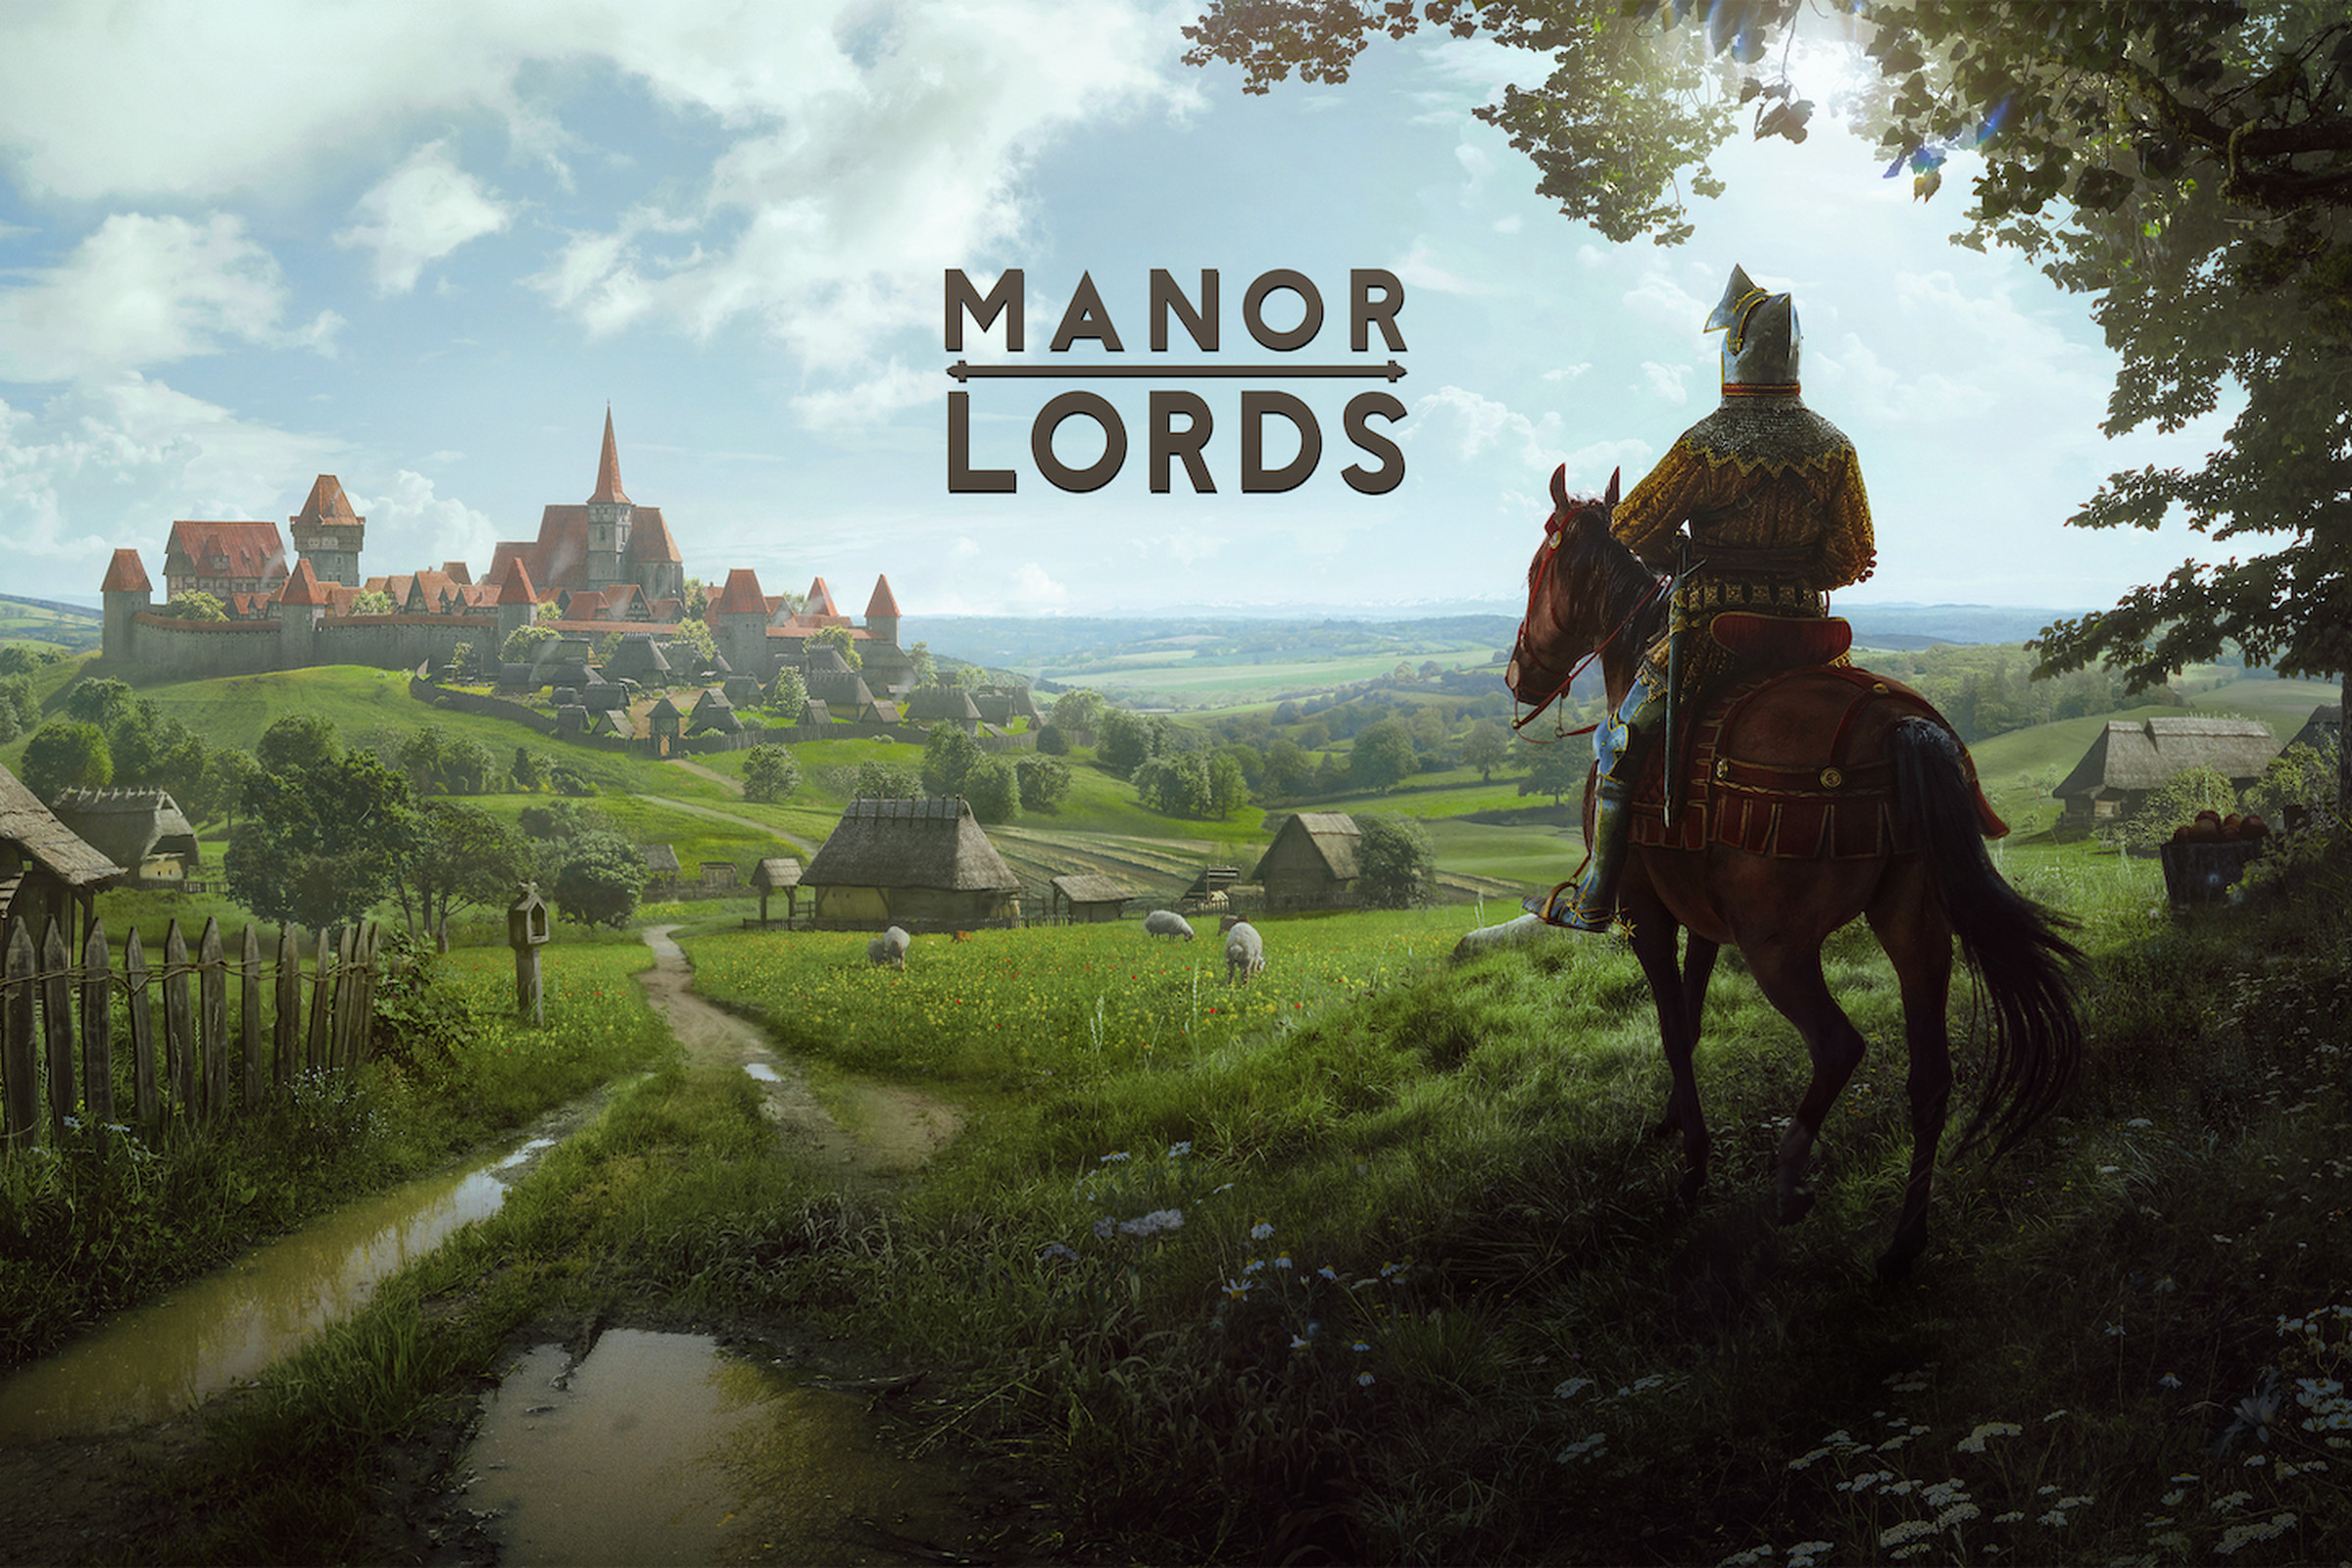 Key art of Manor Lords featuring a knight on a horse overlooking a small medieval town with the text “Manor Lords” in the center of the image.